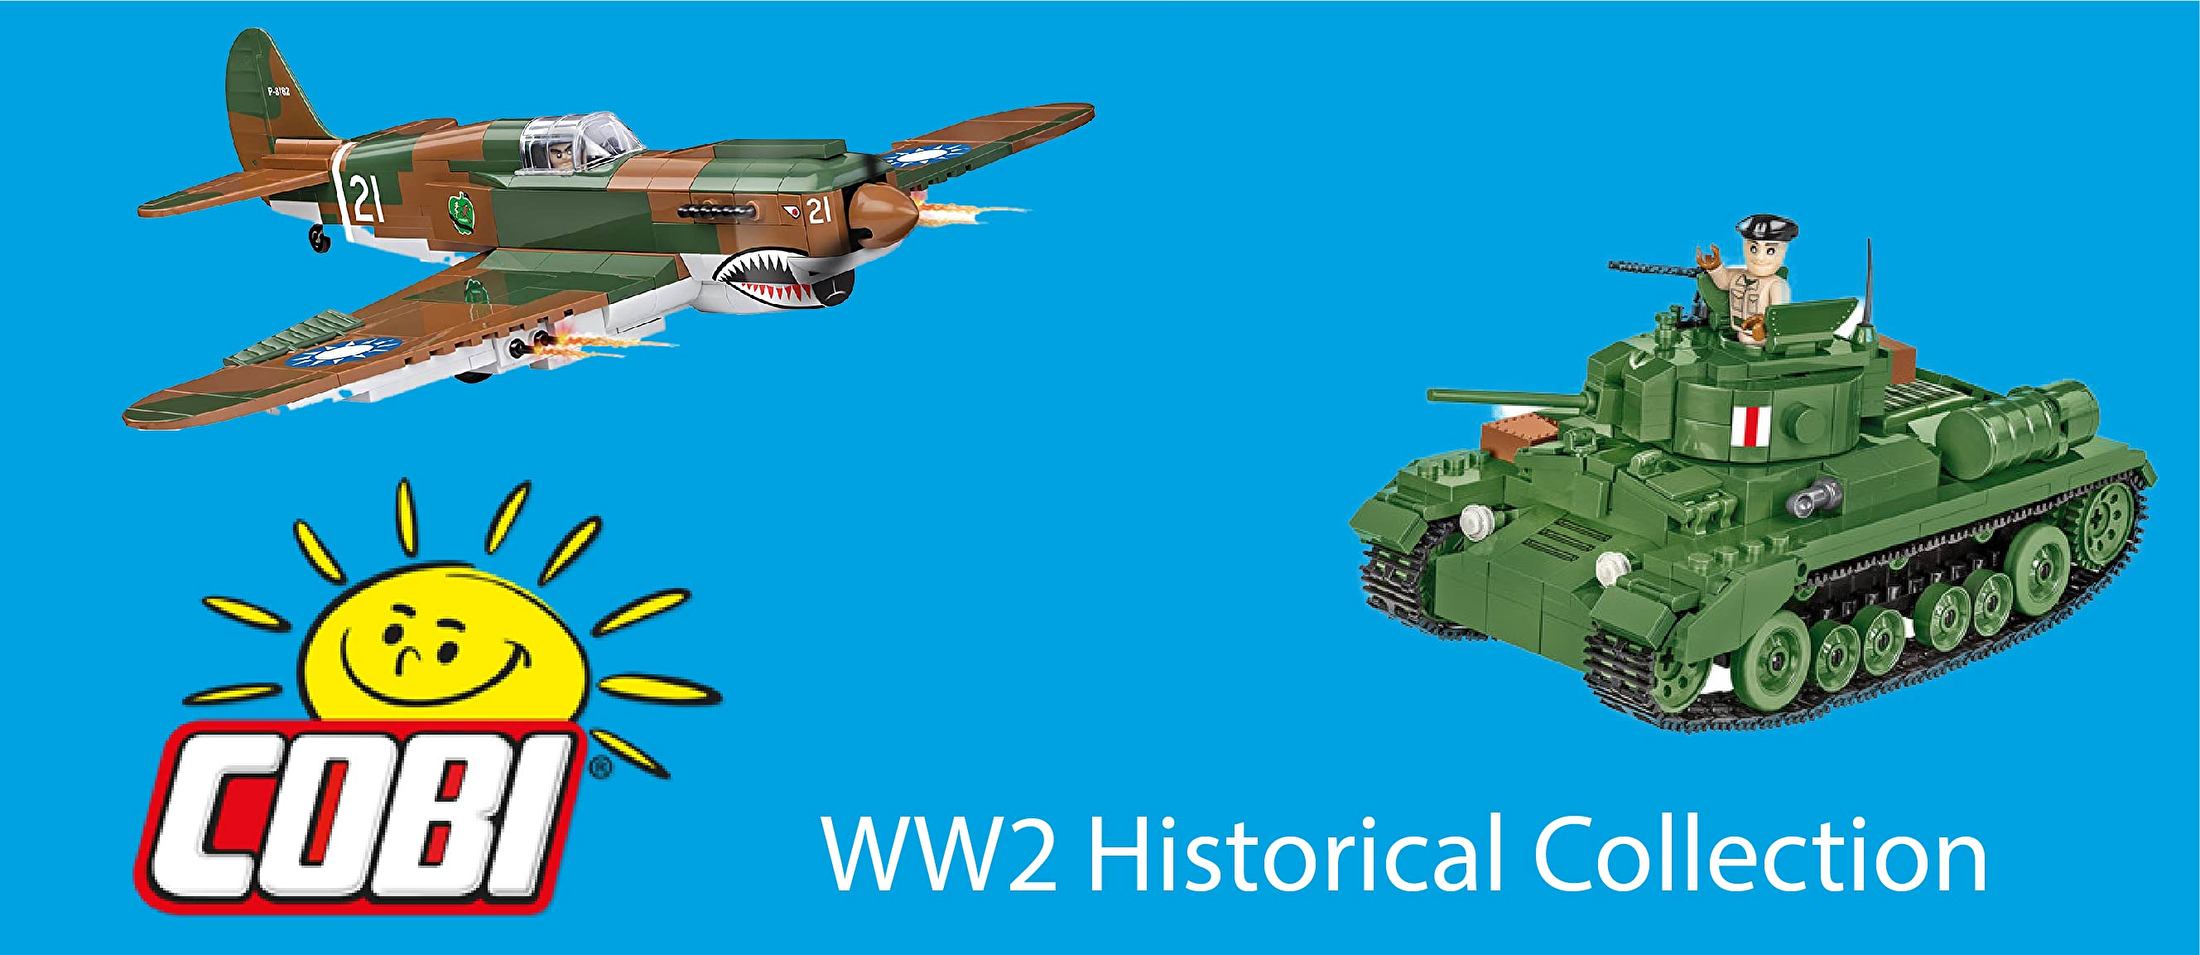 WW2 Historical Collection Header